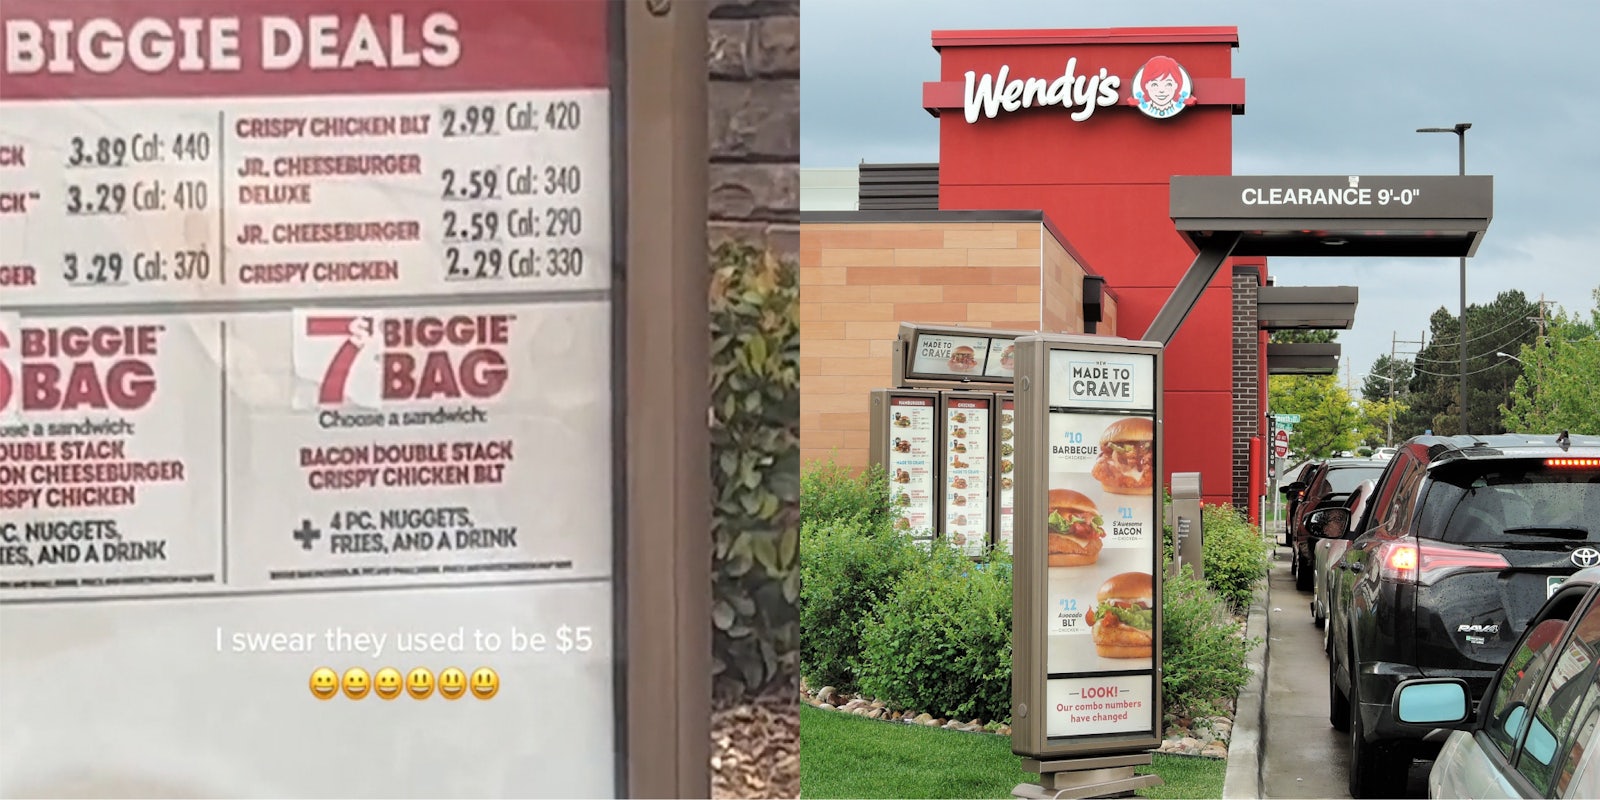 Wendy's drive thru menu with $7 Biggie Bag on sign with caption 'I swear they used to be $5' (l) Wendy's drive thru with sign (c)